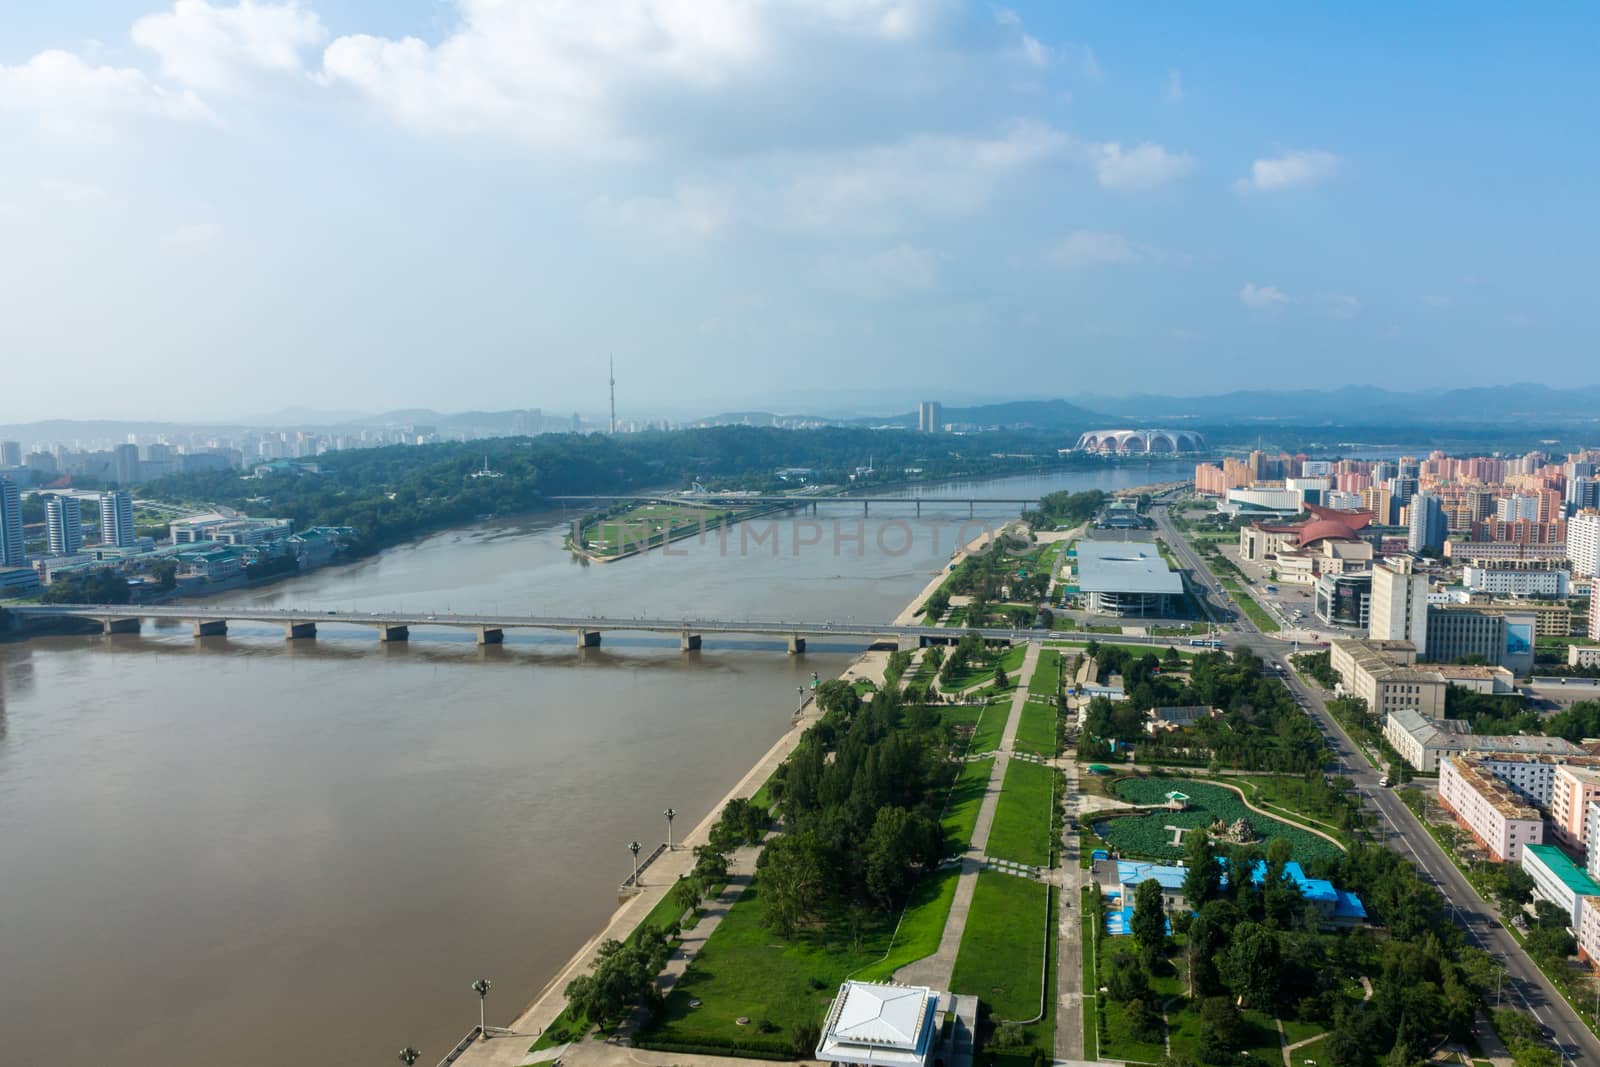  Aerial view of the city in Pyongyang, North Korea. Pyongyang is the capital city of the DPRK.